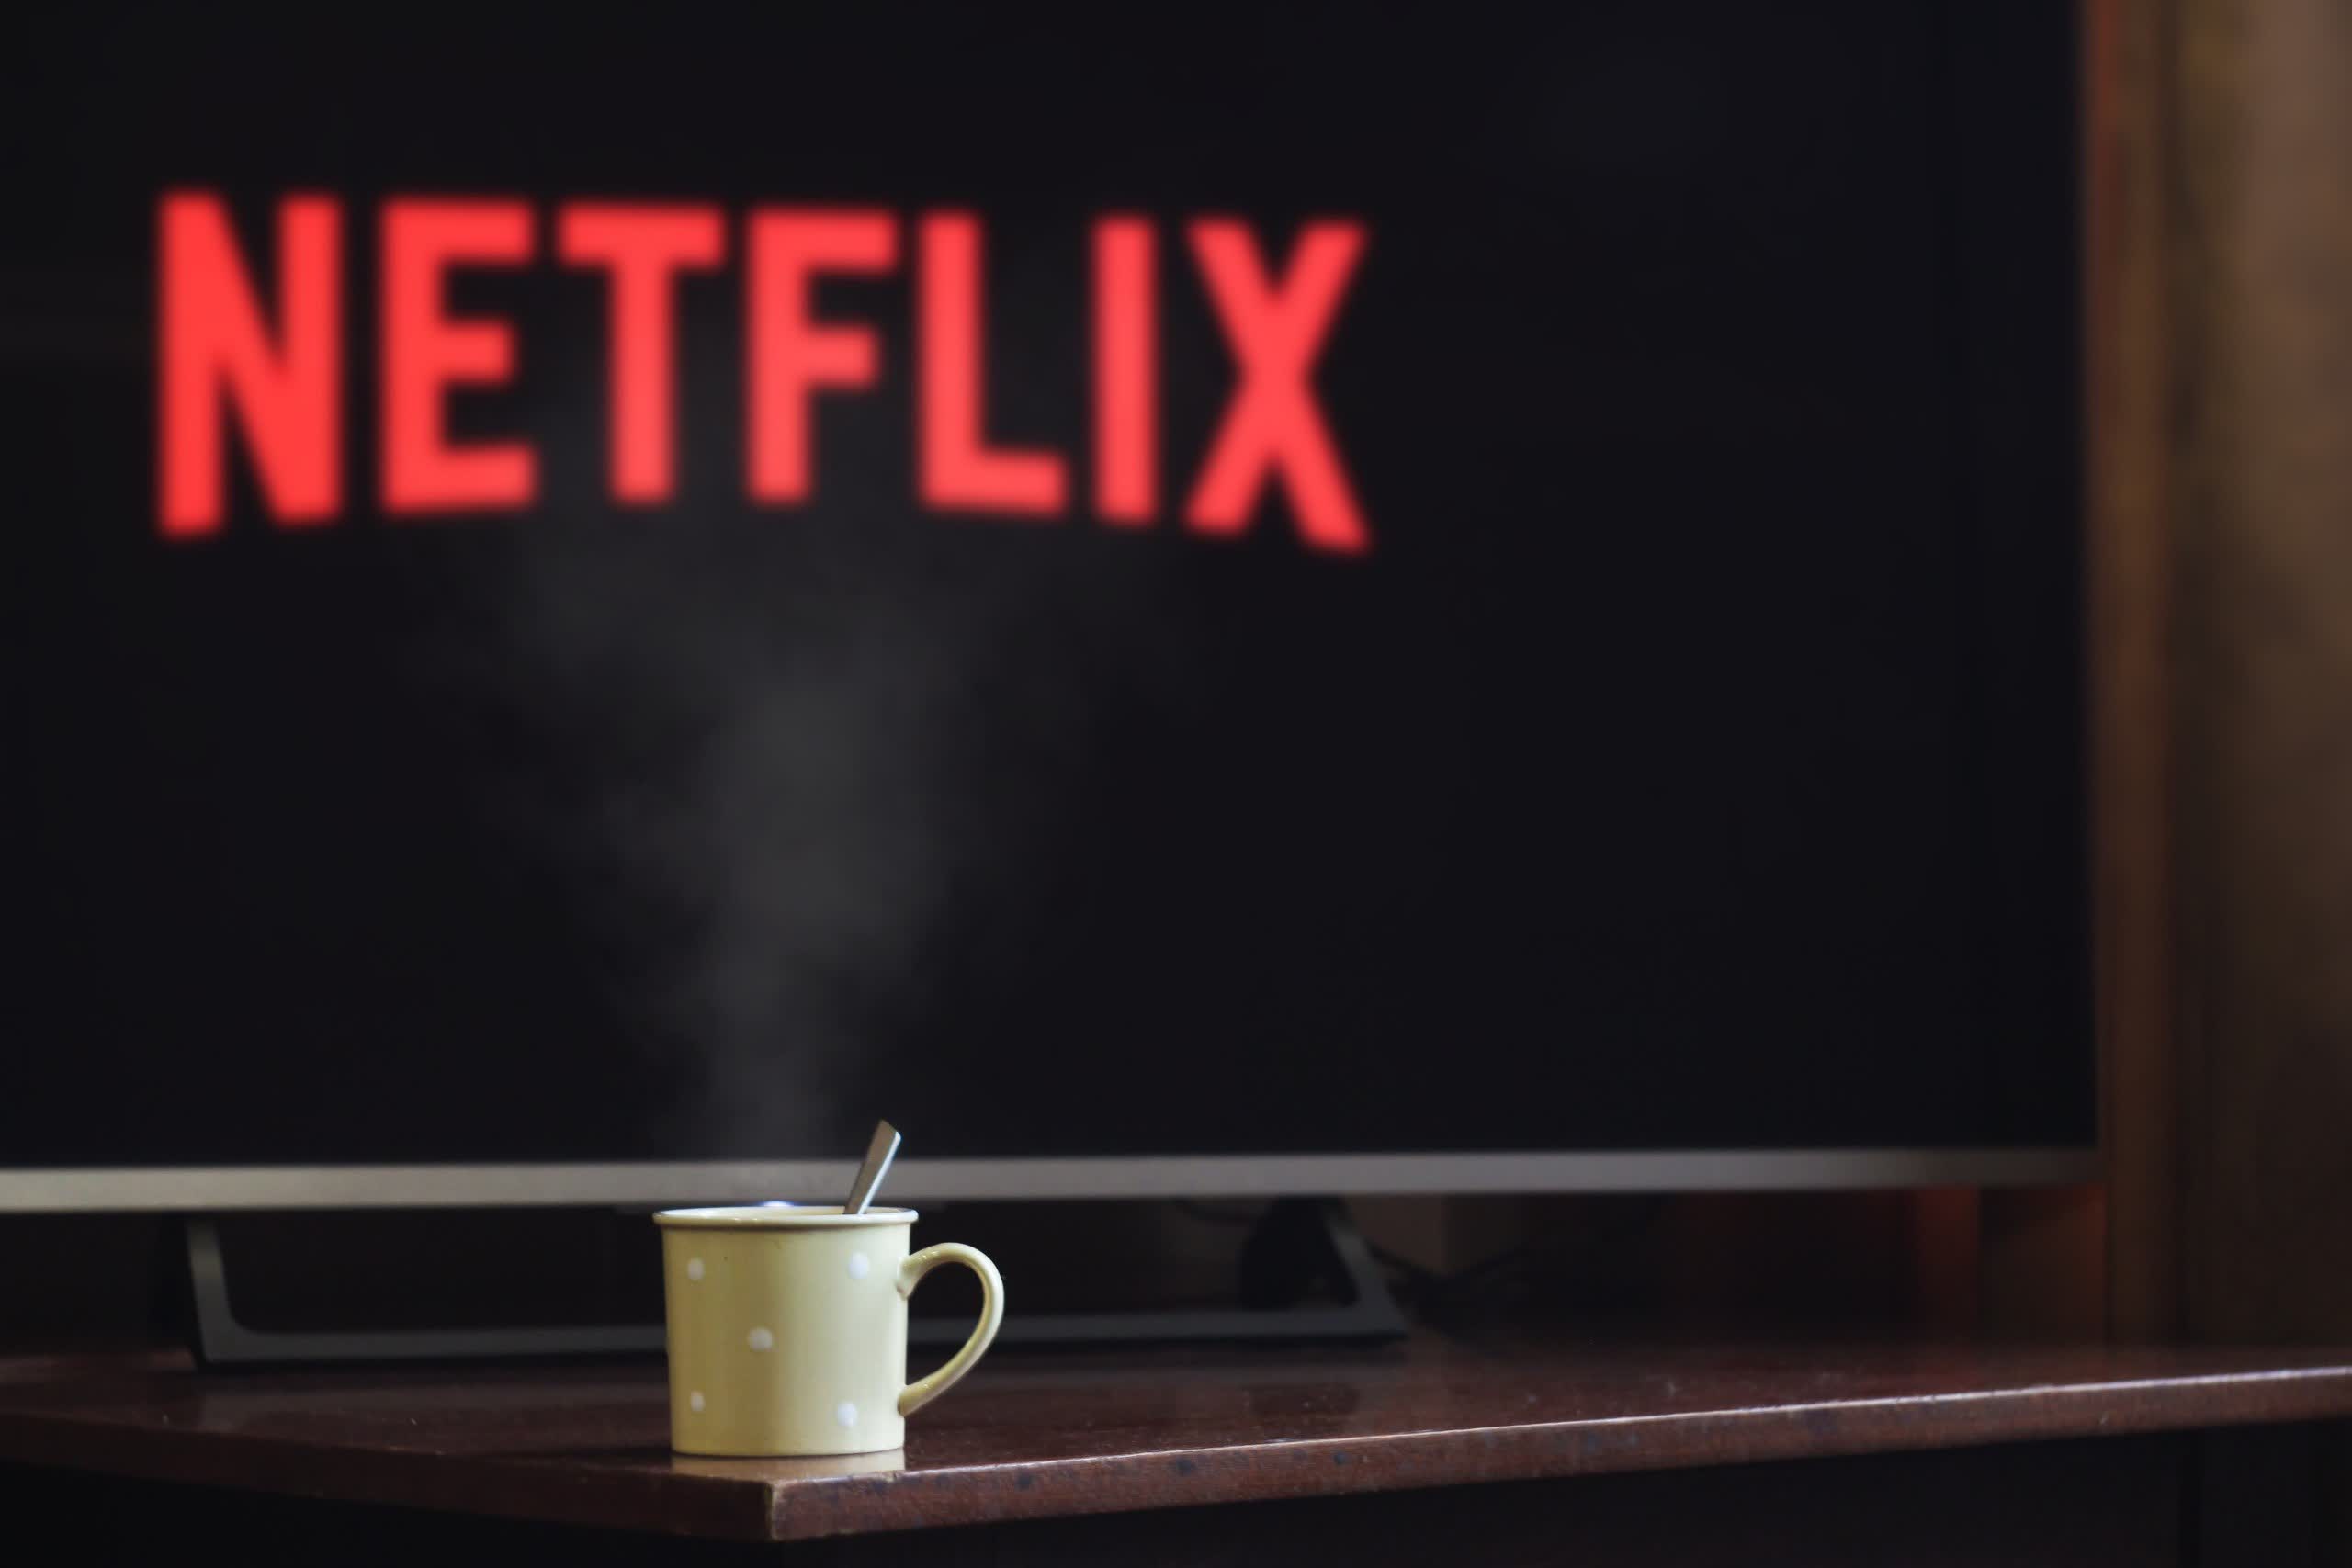 Netflix will start charging US customers for sharing account passwords